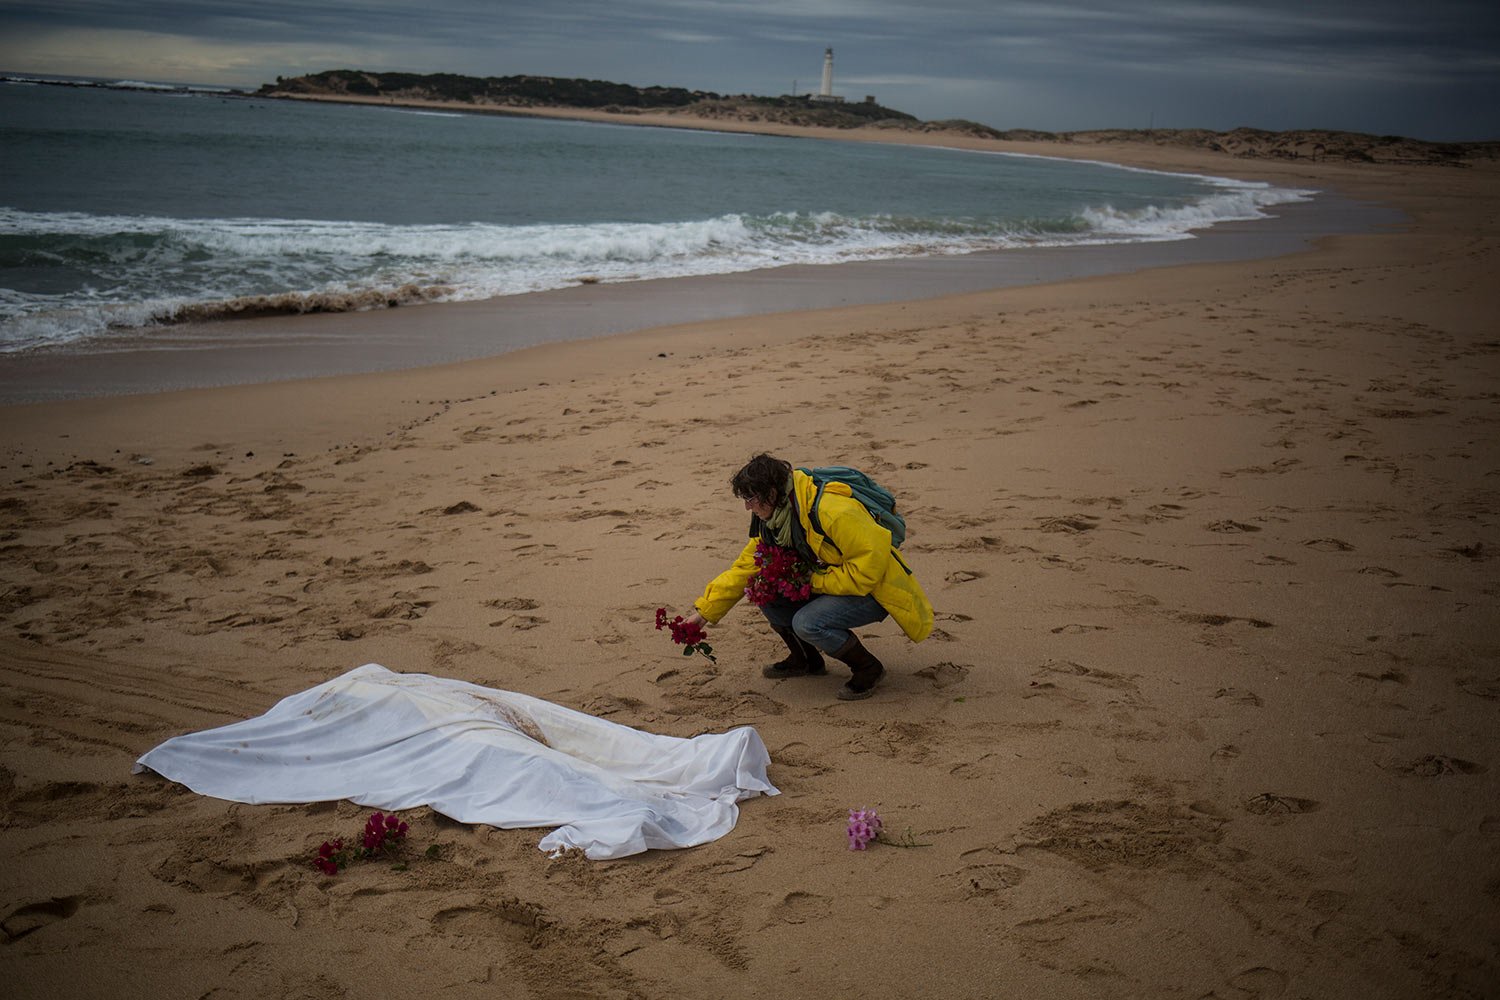  Kate Abrahams, originally from Belgium, places flowers next to the body of a dead migrant on the beach at the village of Canos de Meca, where seventeen bodies were recovered from the sea after their precarious vessel impacted rocks while trying to r